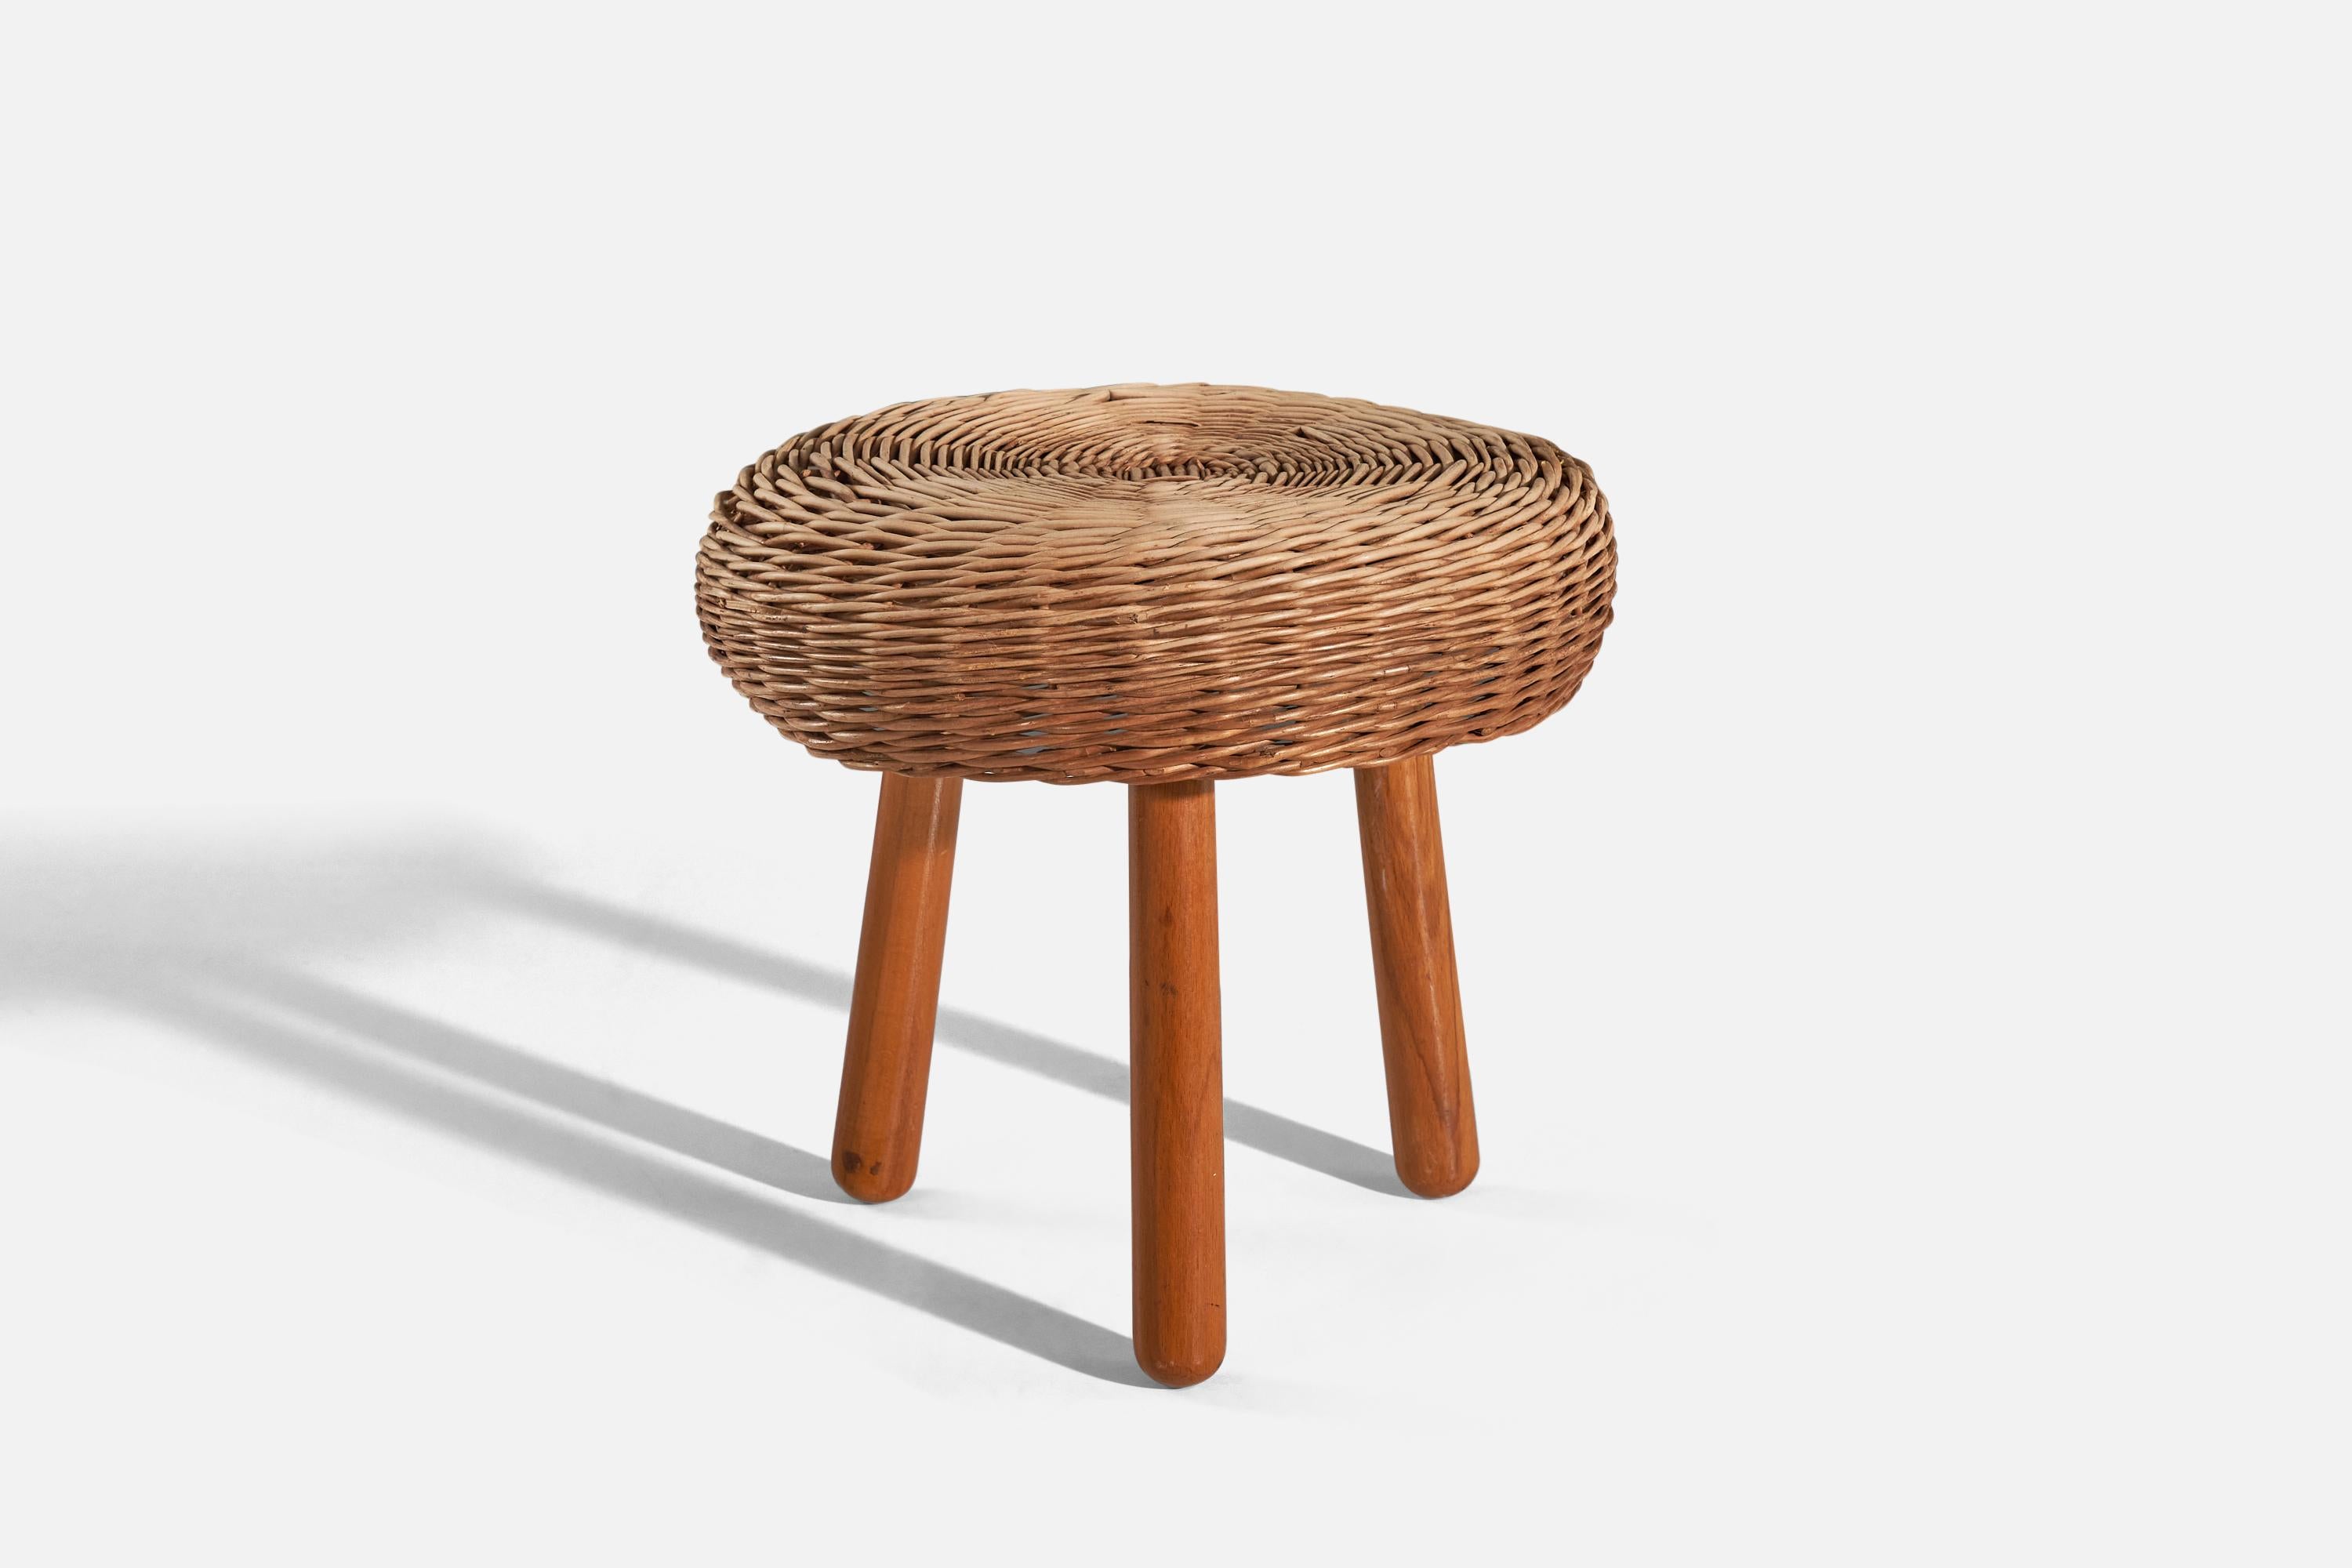 A wicker and wood stool, designed and produced by Tony Paul, United States, 1950s.
 